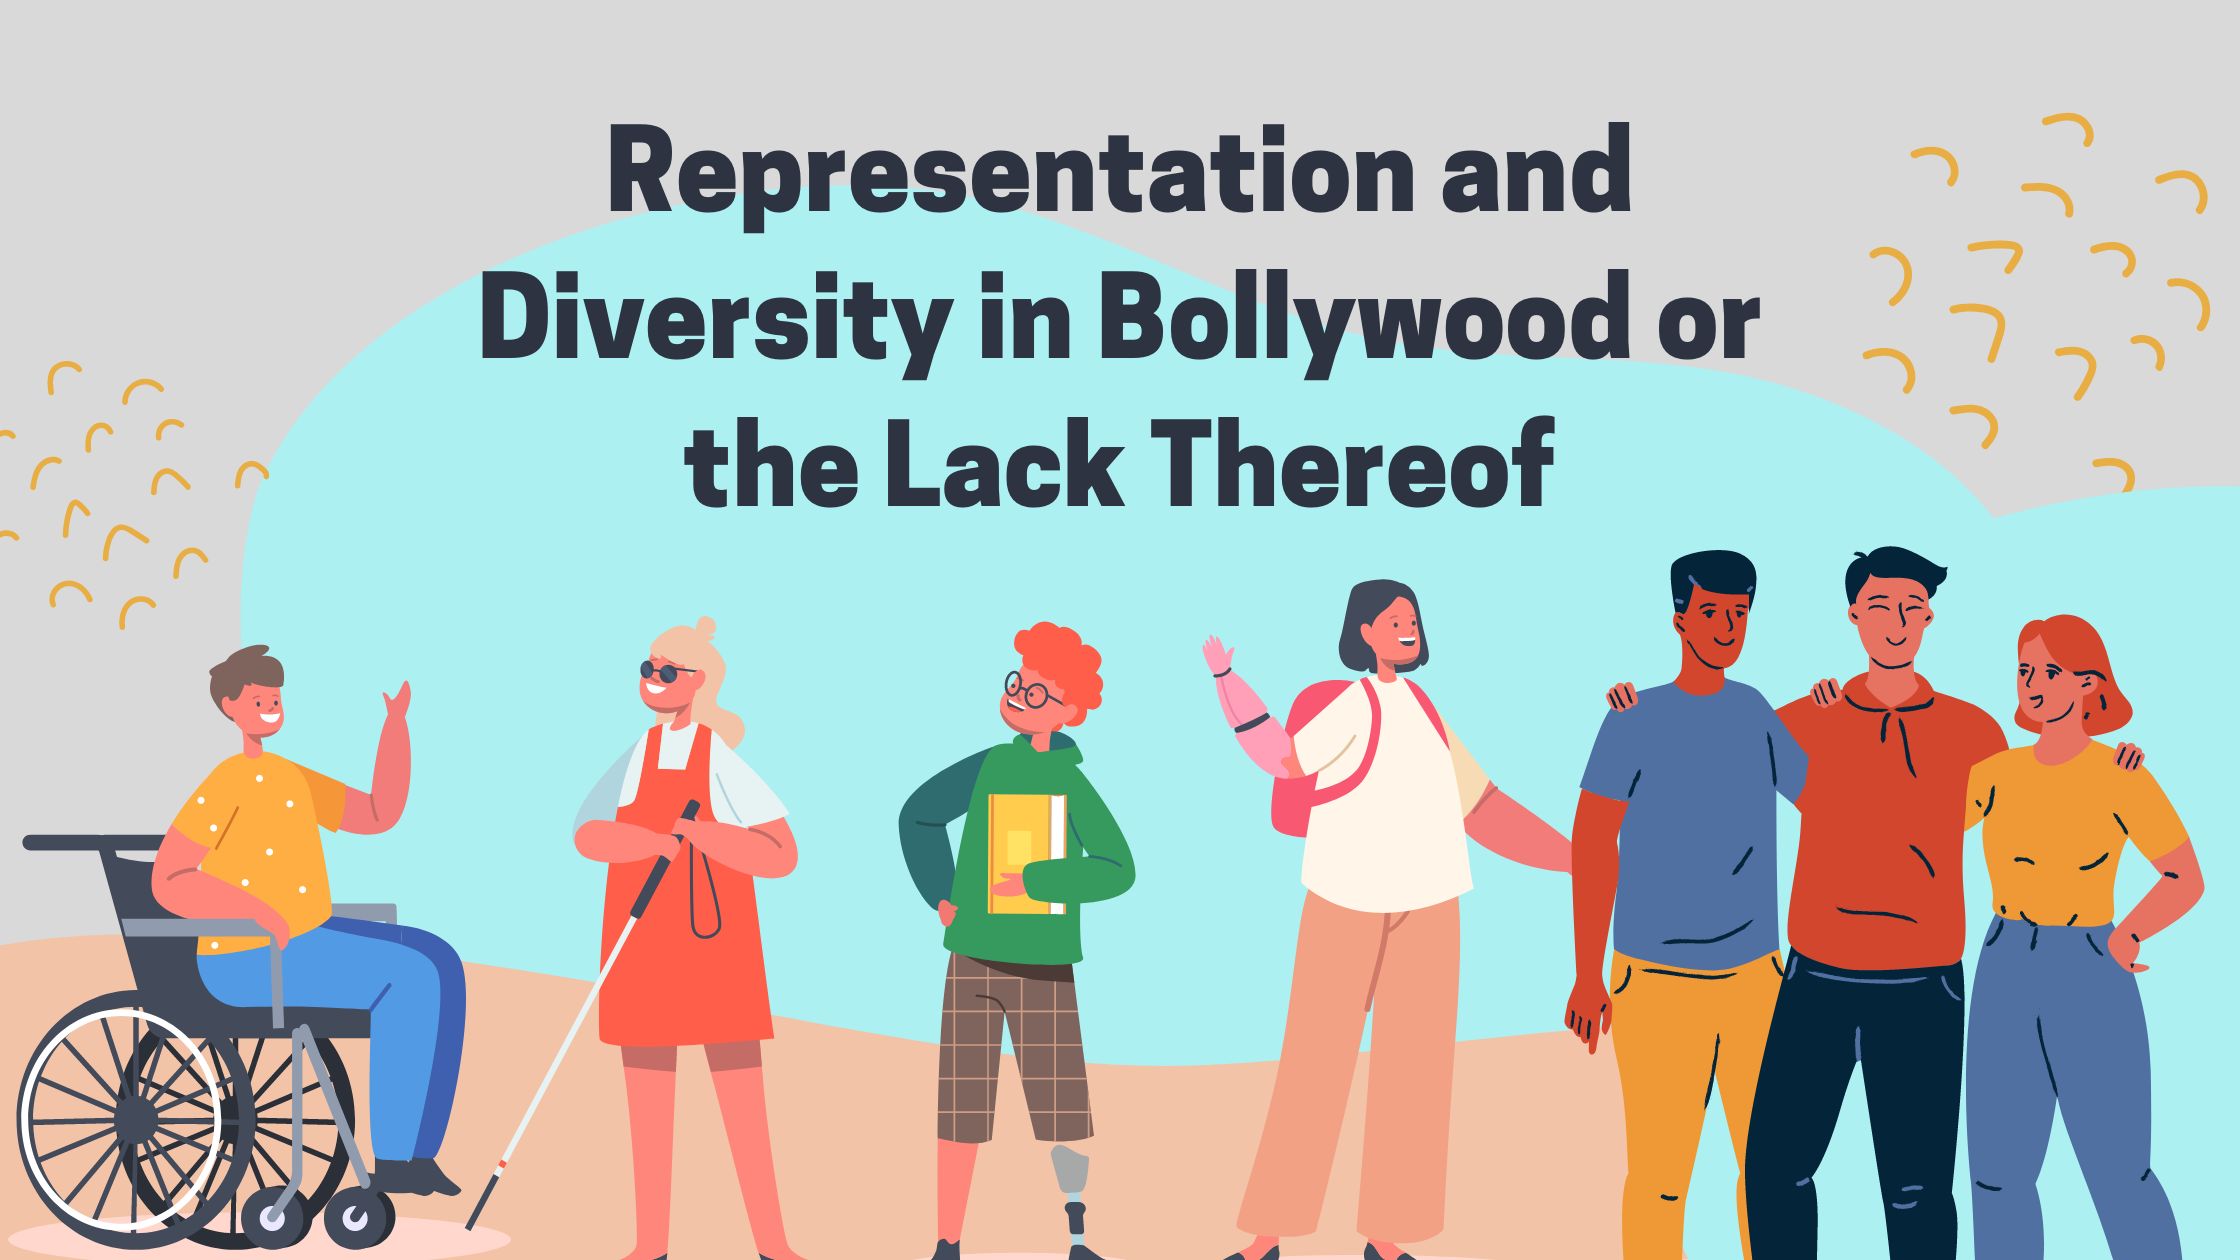 Representation and Diversity in Bollywood or the lack thereof